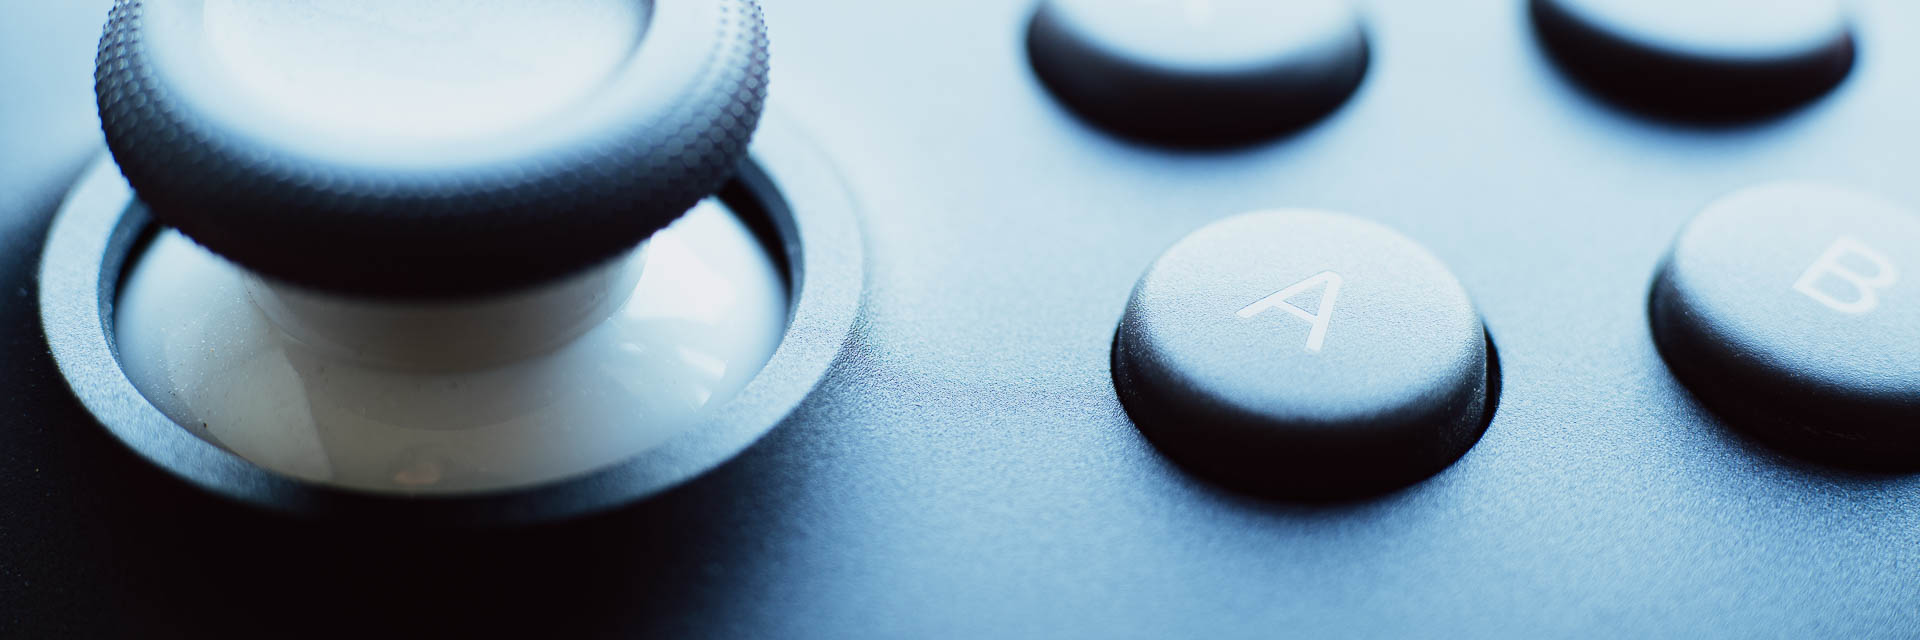 Hero image of a Stadia controller